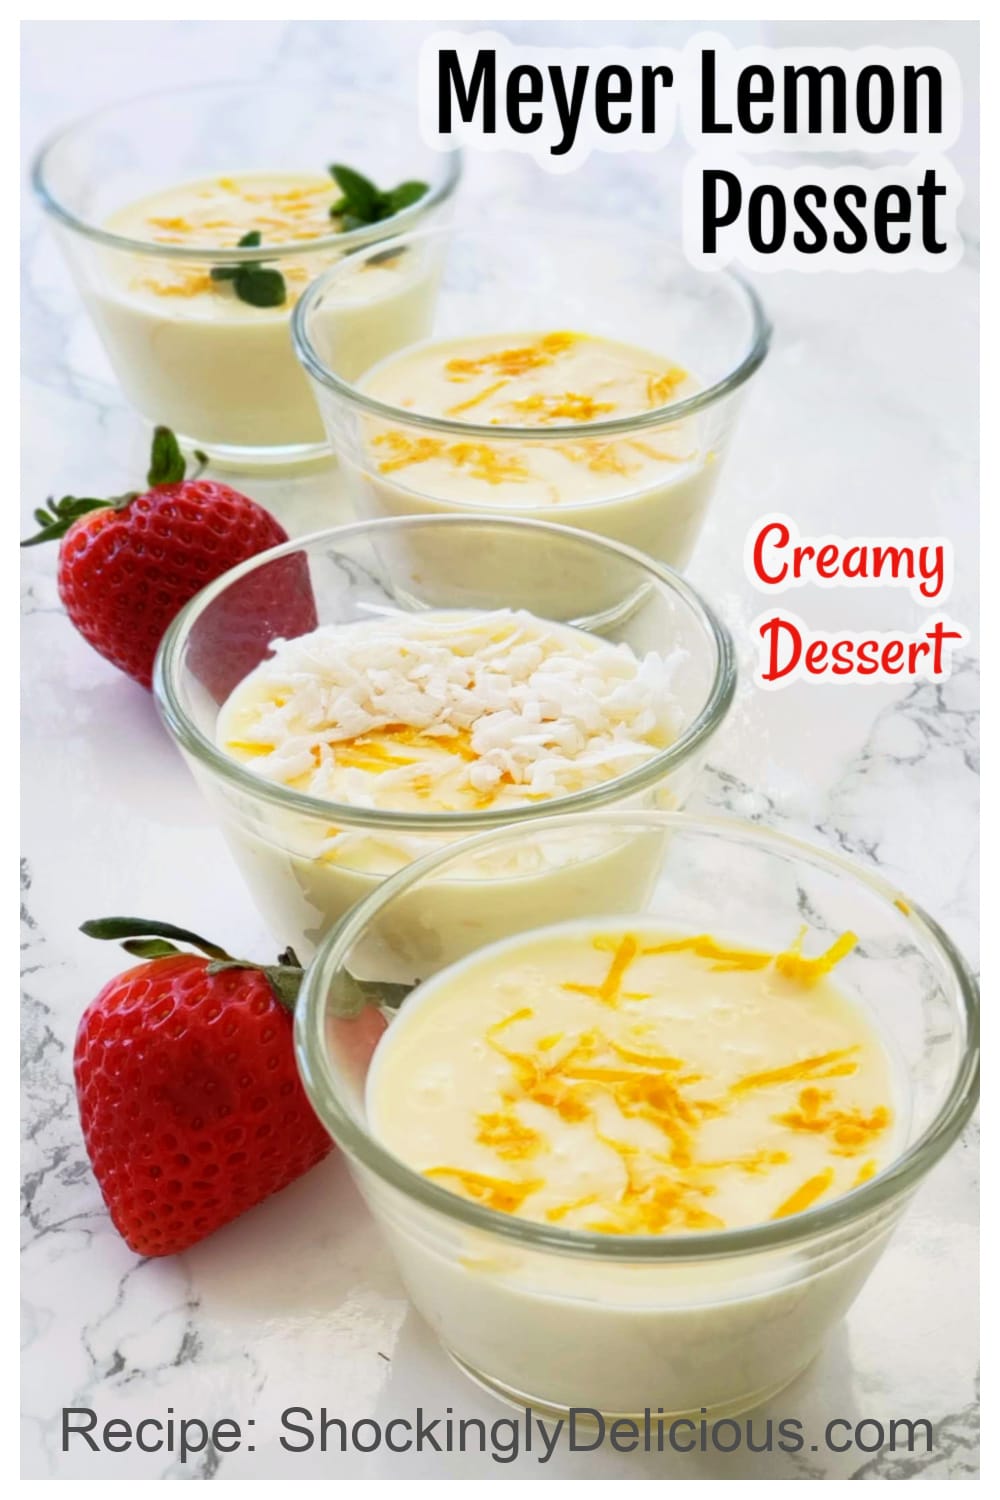 4 glass cups of yellow pudding with lemon zest on top are arrayed on a white marble counter, with the recipe title superimposed on the photo